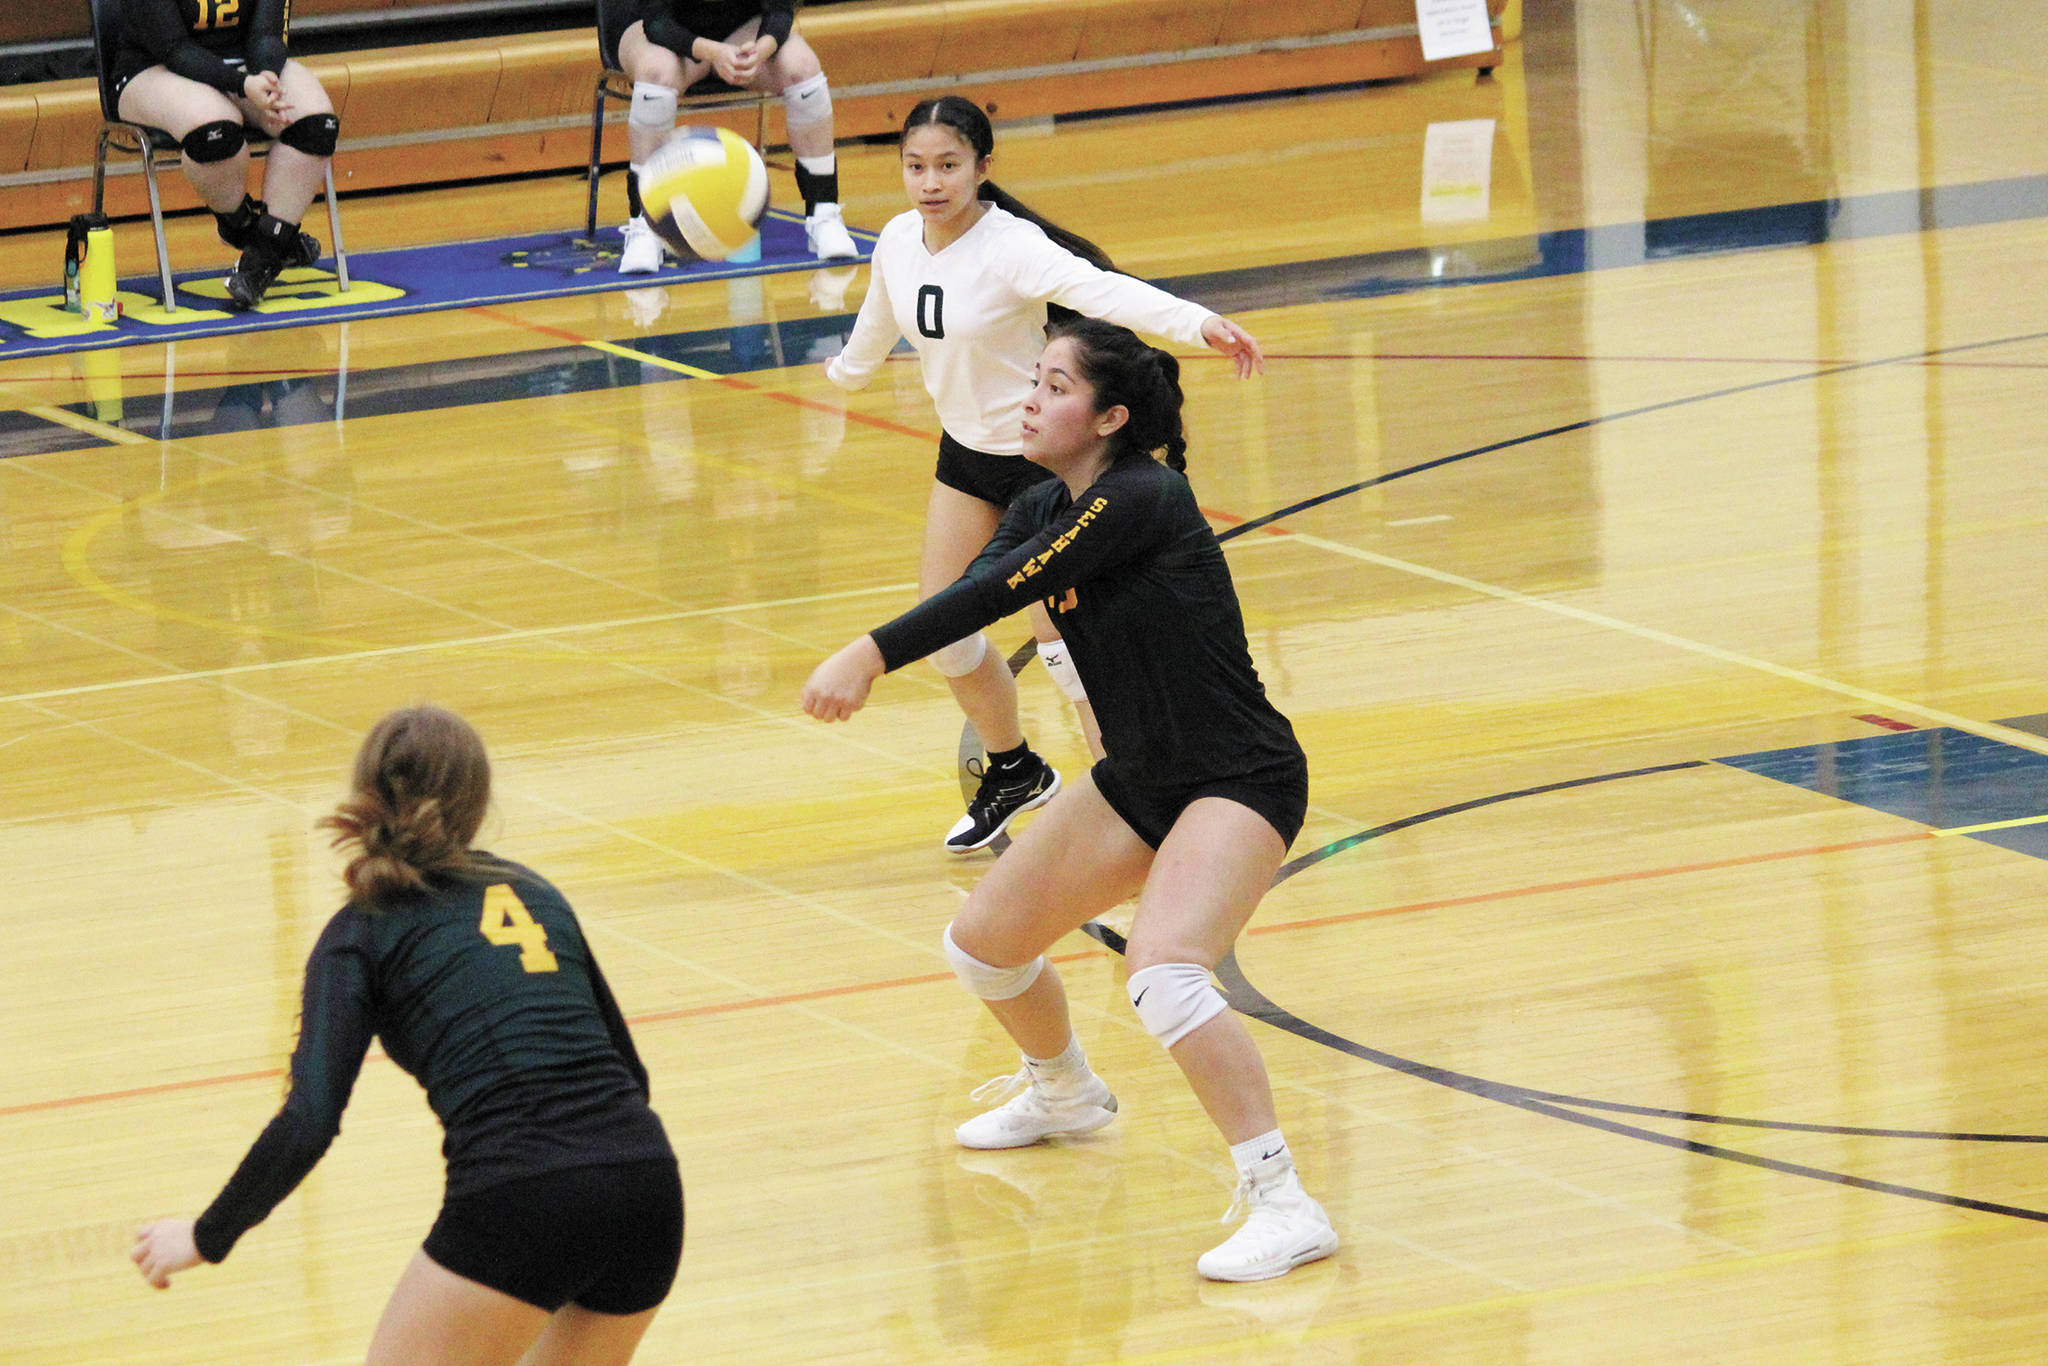 Seward’s Selma Casagranda digs the ball during a volleyball game against the Homer Mariners on Friday, Sept. 4, 2020 at the Alice Witte Gymnasium in Homer, Alaska. (Photo by Megan Pacer/Homer News)